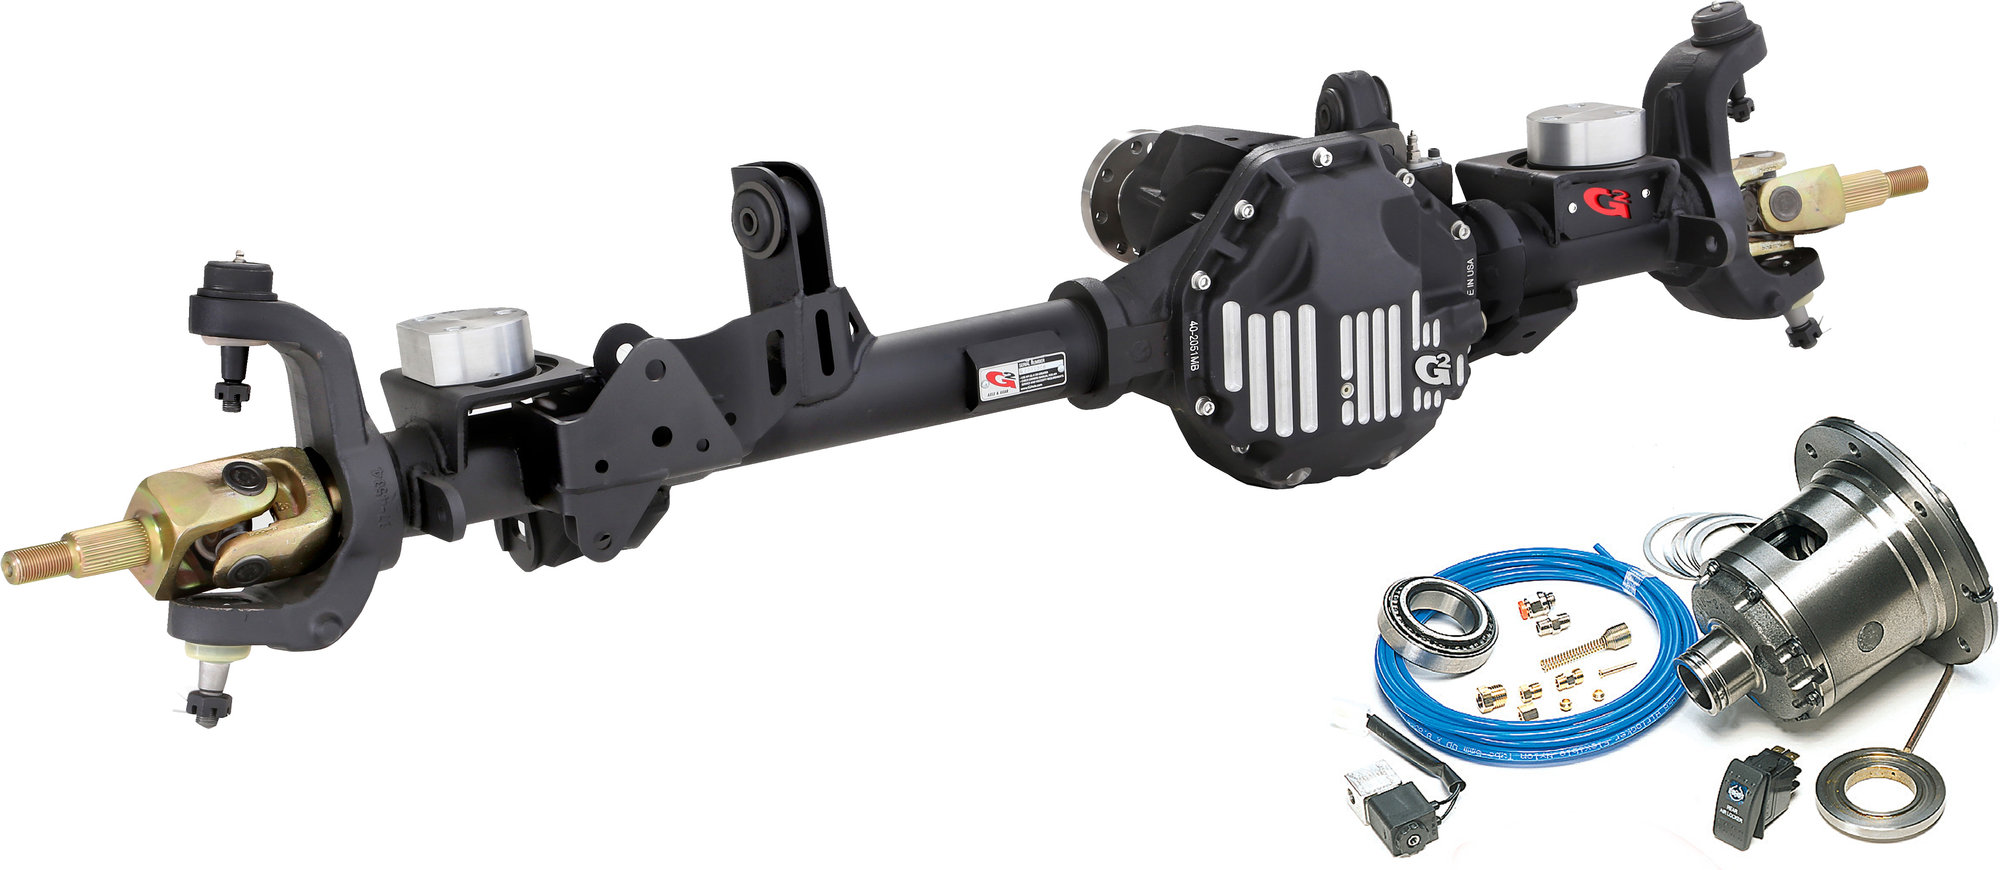 G2 Axle & Gear 35 Spline Front Core 44 Axle Assembly with ARB Air Lockers &  Lifted Caster for 07-18 Jeep Wrangler JK | Quadratec